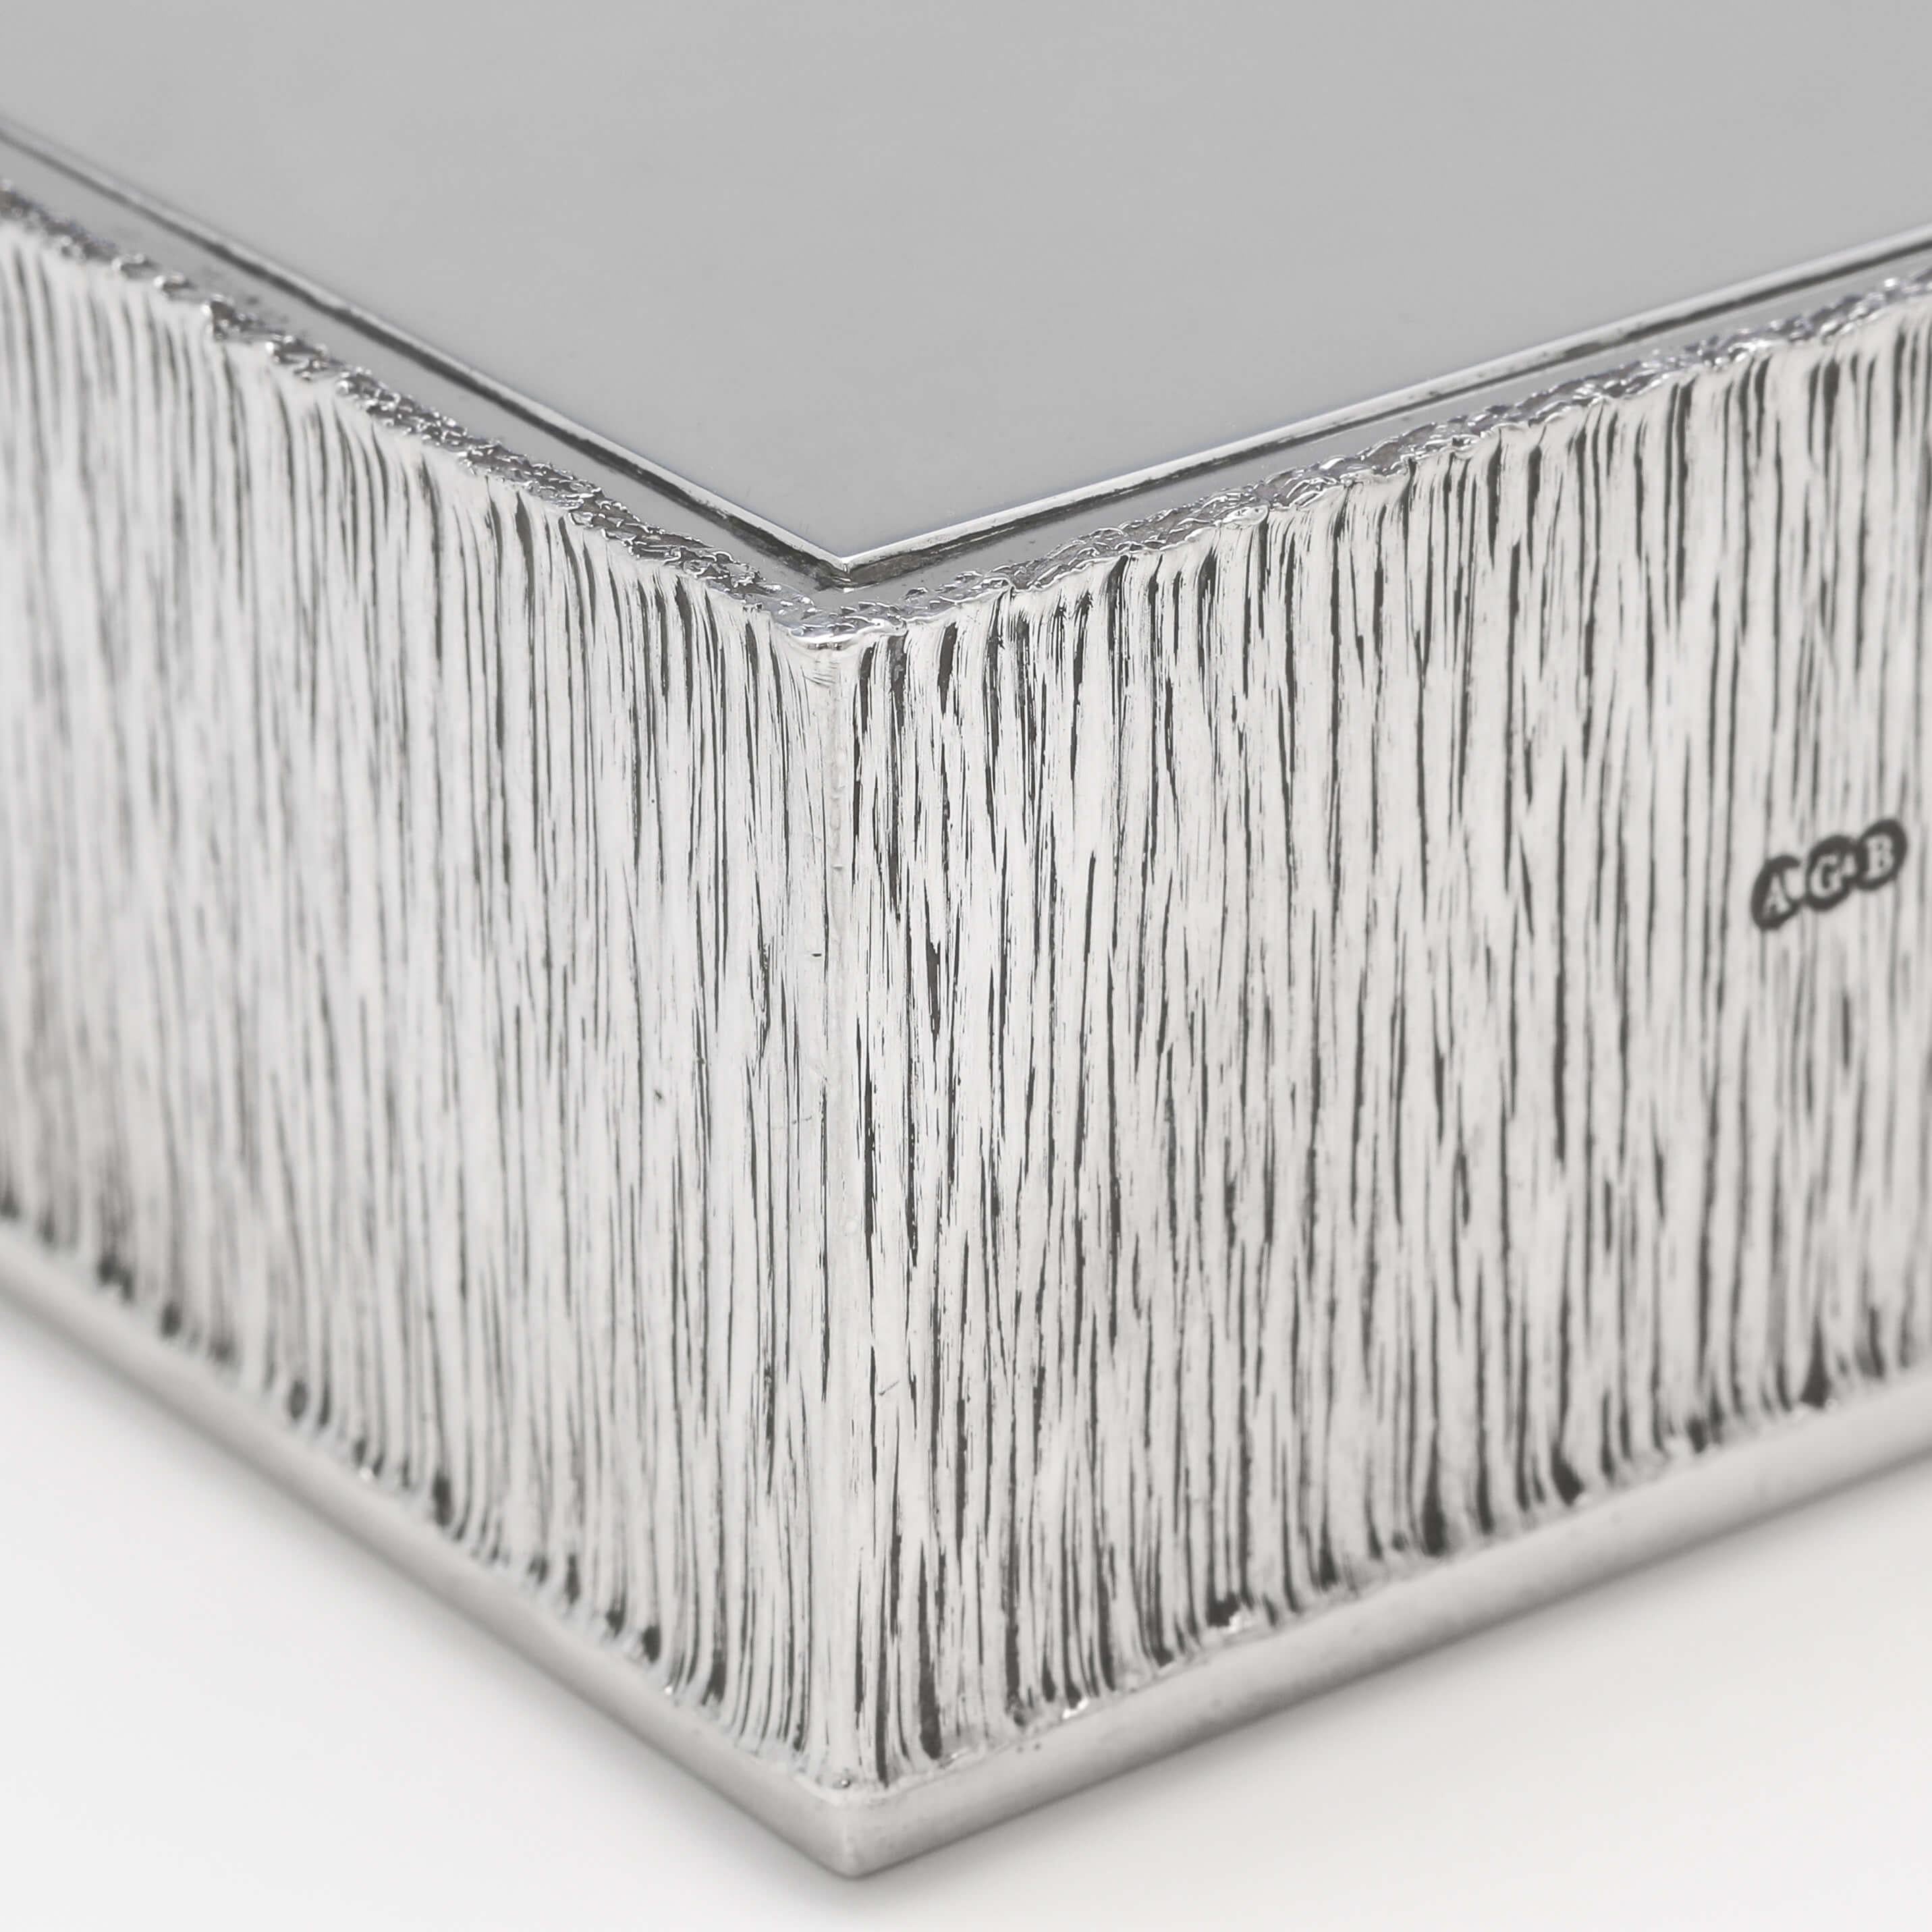 English Mid-Century Modern Sterling Silver Bridge Box by Gerald Benney, London, 1970 For Sale